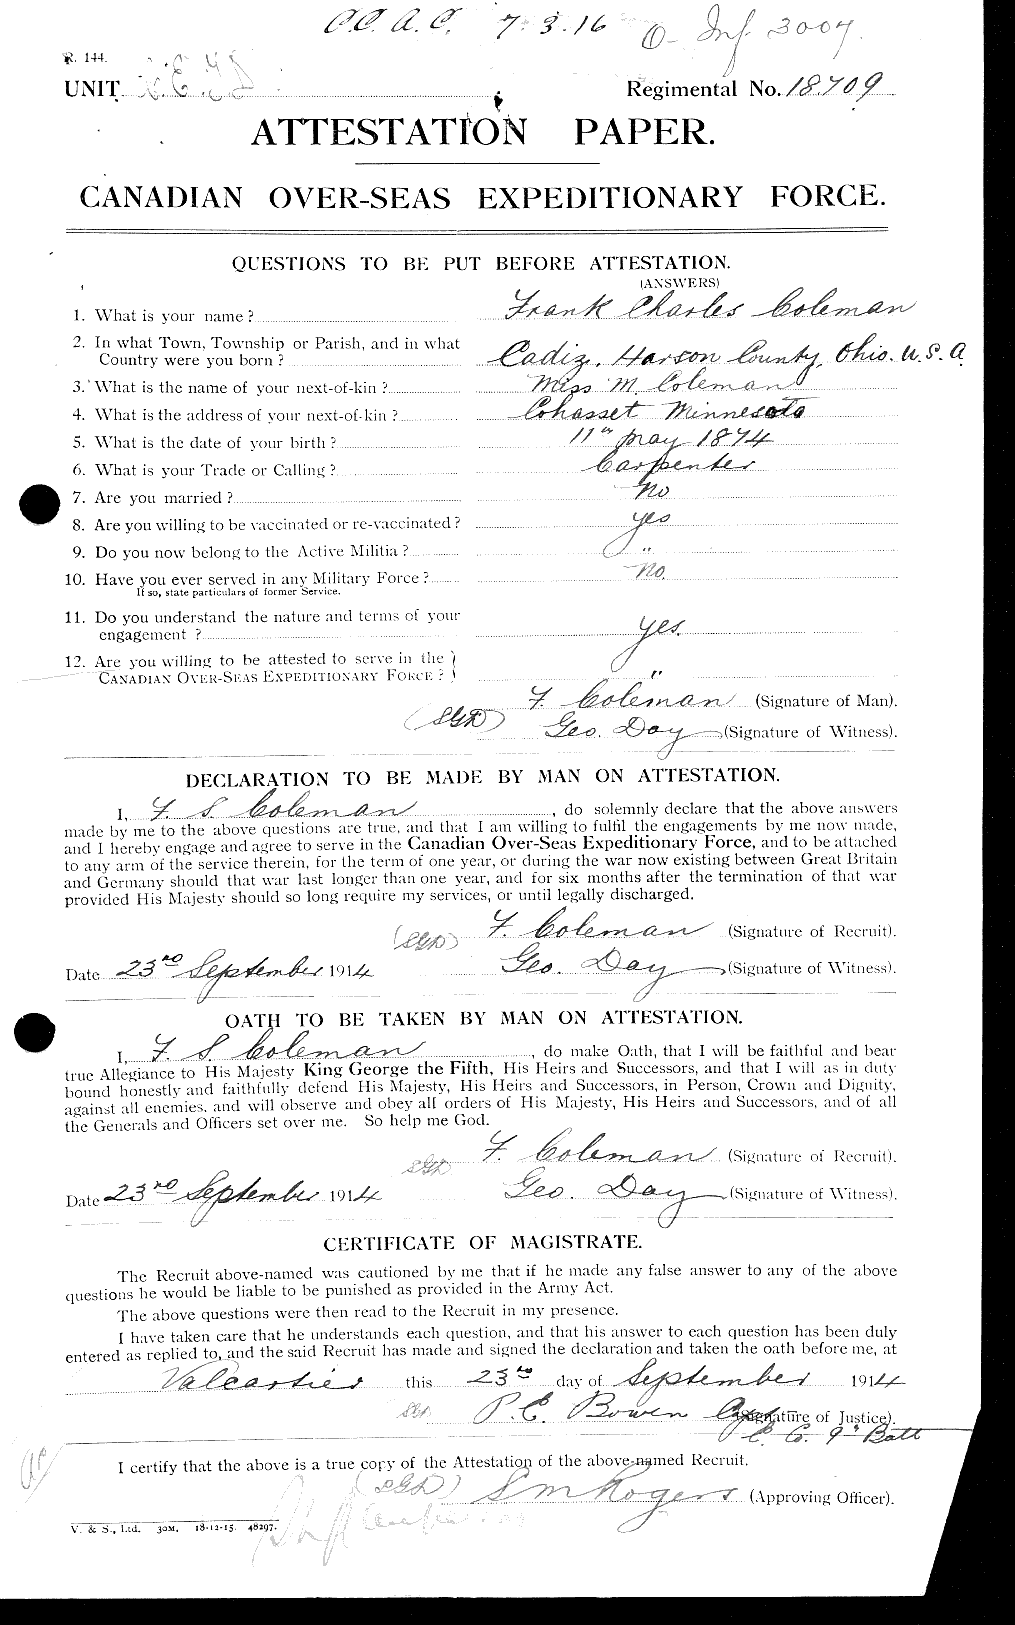 Personnel Records of the First World War - CEF 028126a